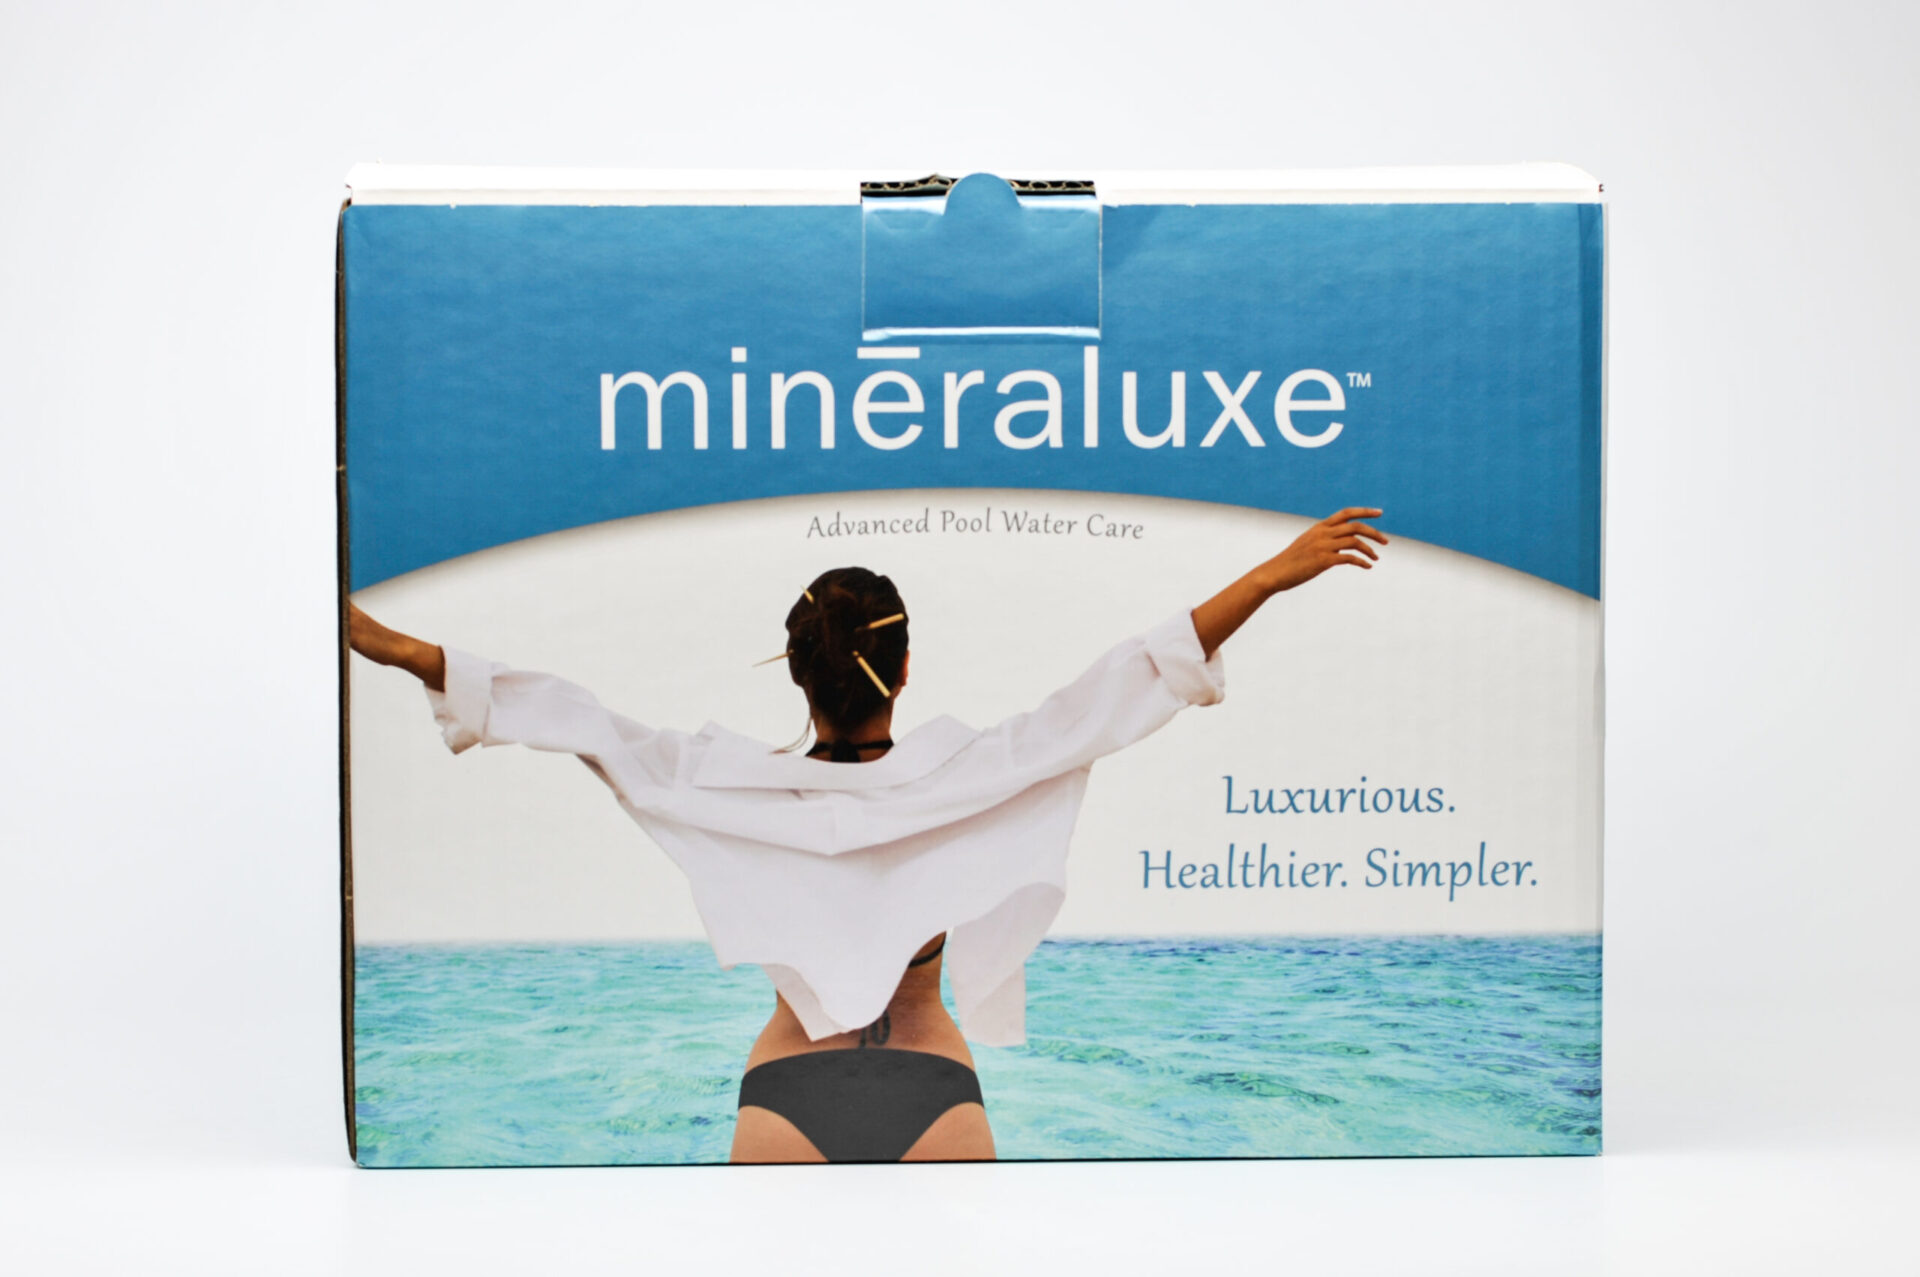 Mineraluxe Pool Maintenance Kit scaled - Mineraluxe Pool Maintenance Kit